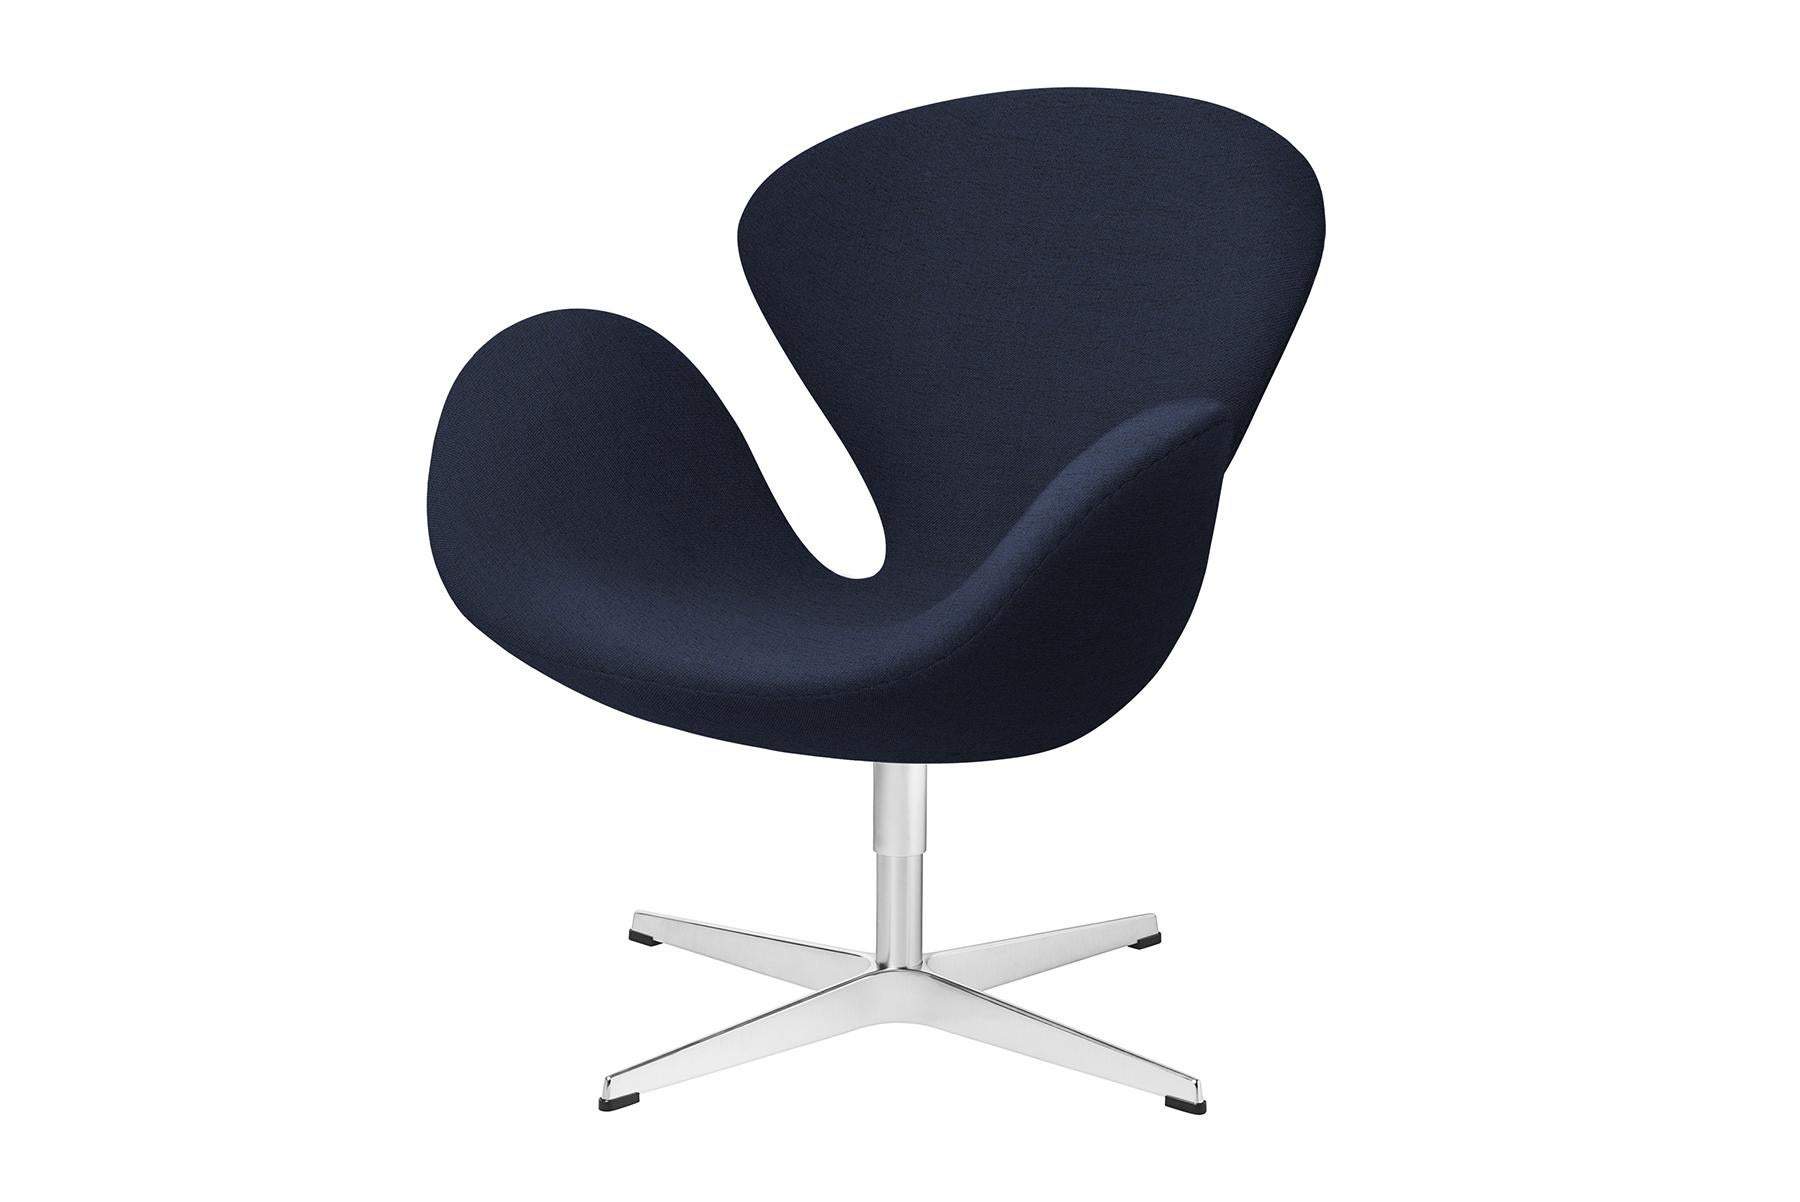 In 1959 Arne Jacobsen created Gryden, in English meaning the Pot, a light take on an embracive lounge chair and originally designed for the SAS Royal Hotel in Copenhagen. The shape is the same as the original design from 1959 the seat and materials